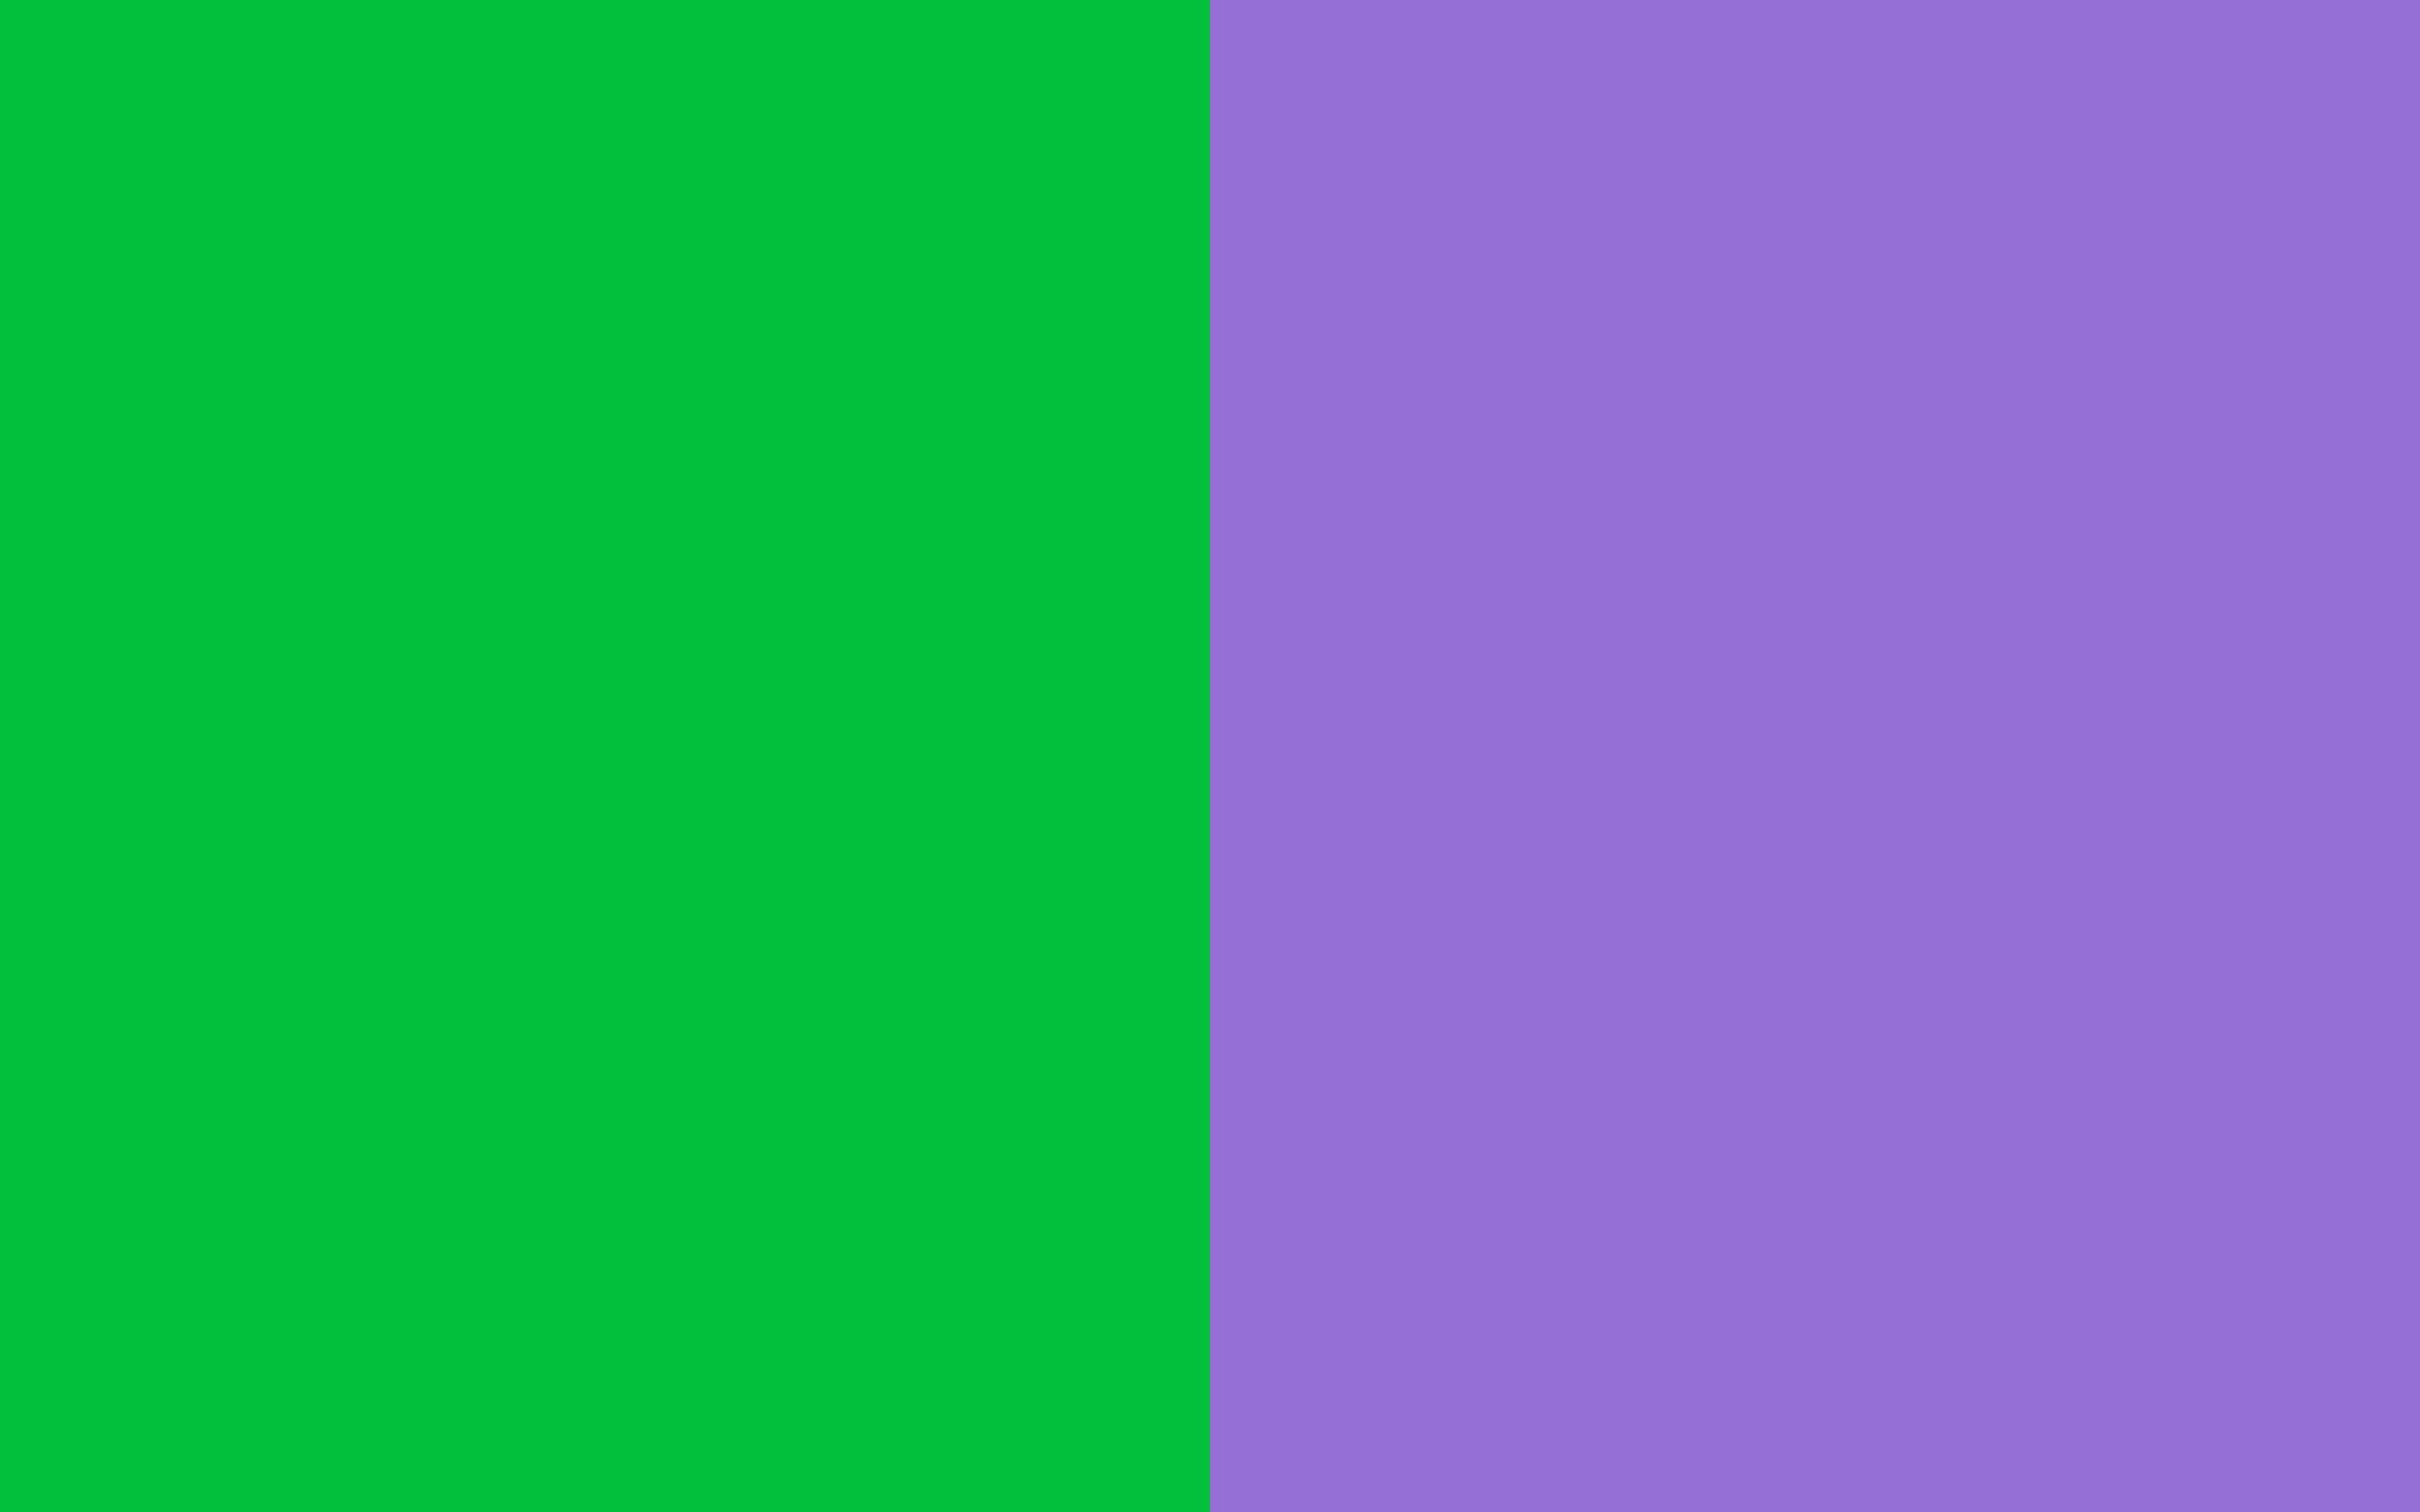  Pastel Green and Dark Pastel Purple solid two color background